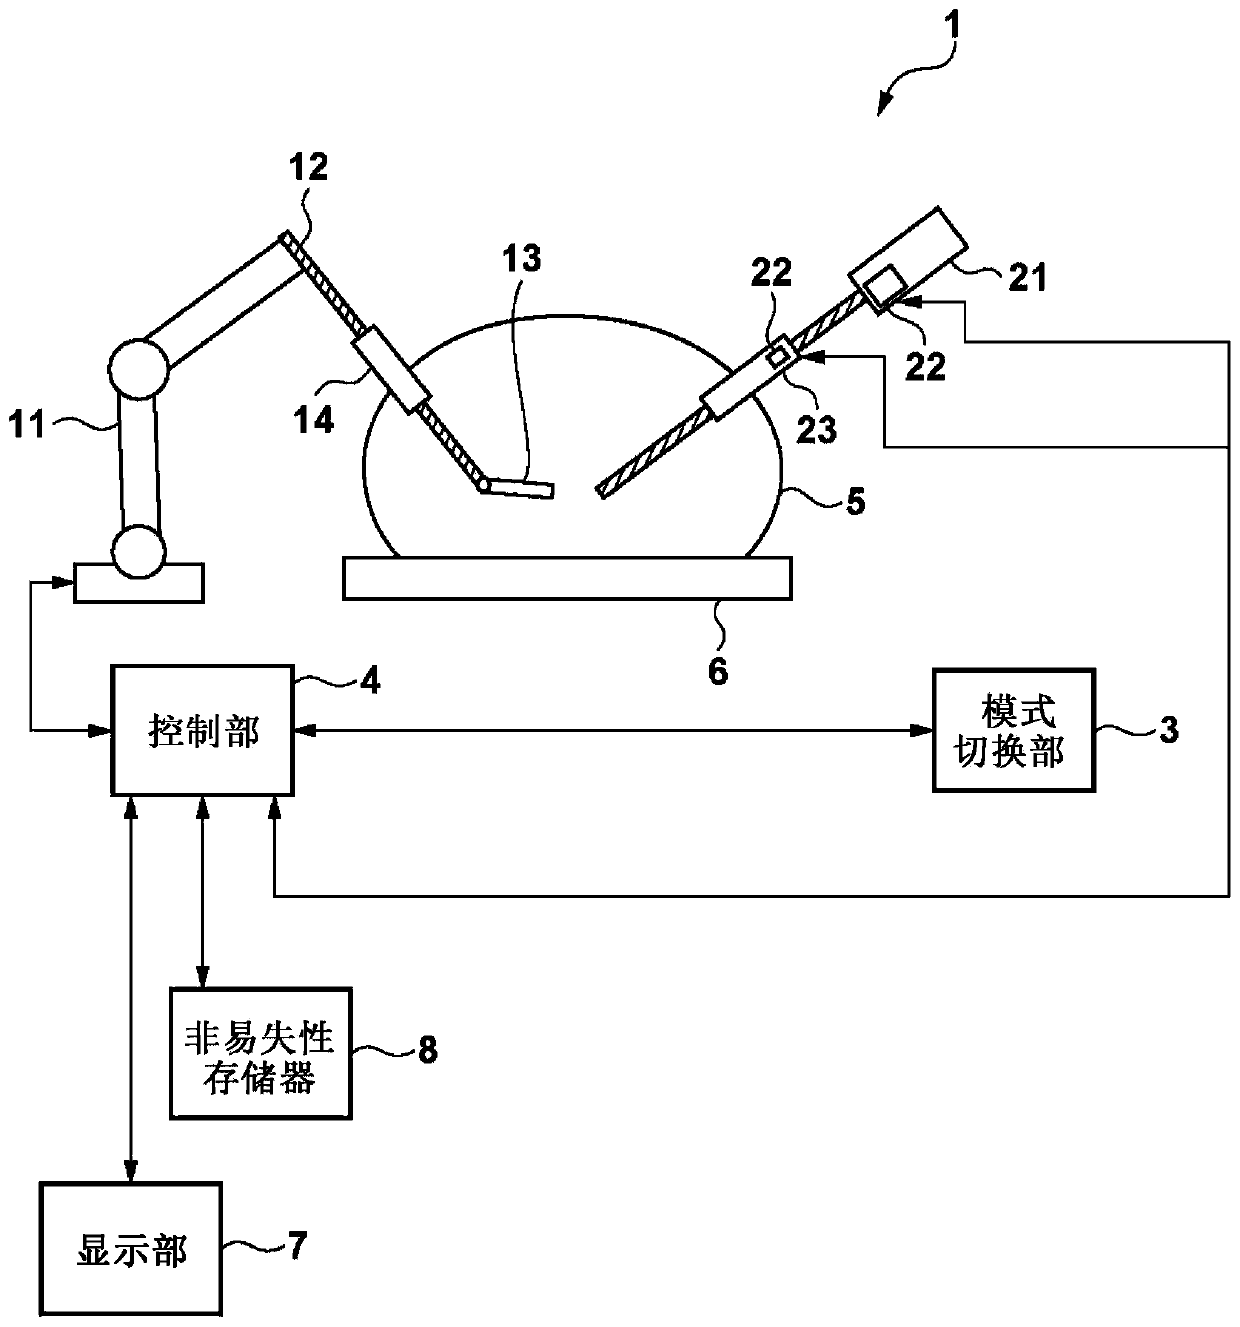 Surgical assistance device, control method therefor, and surgical assistance system